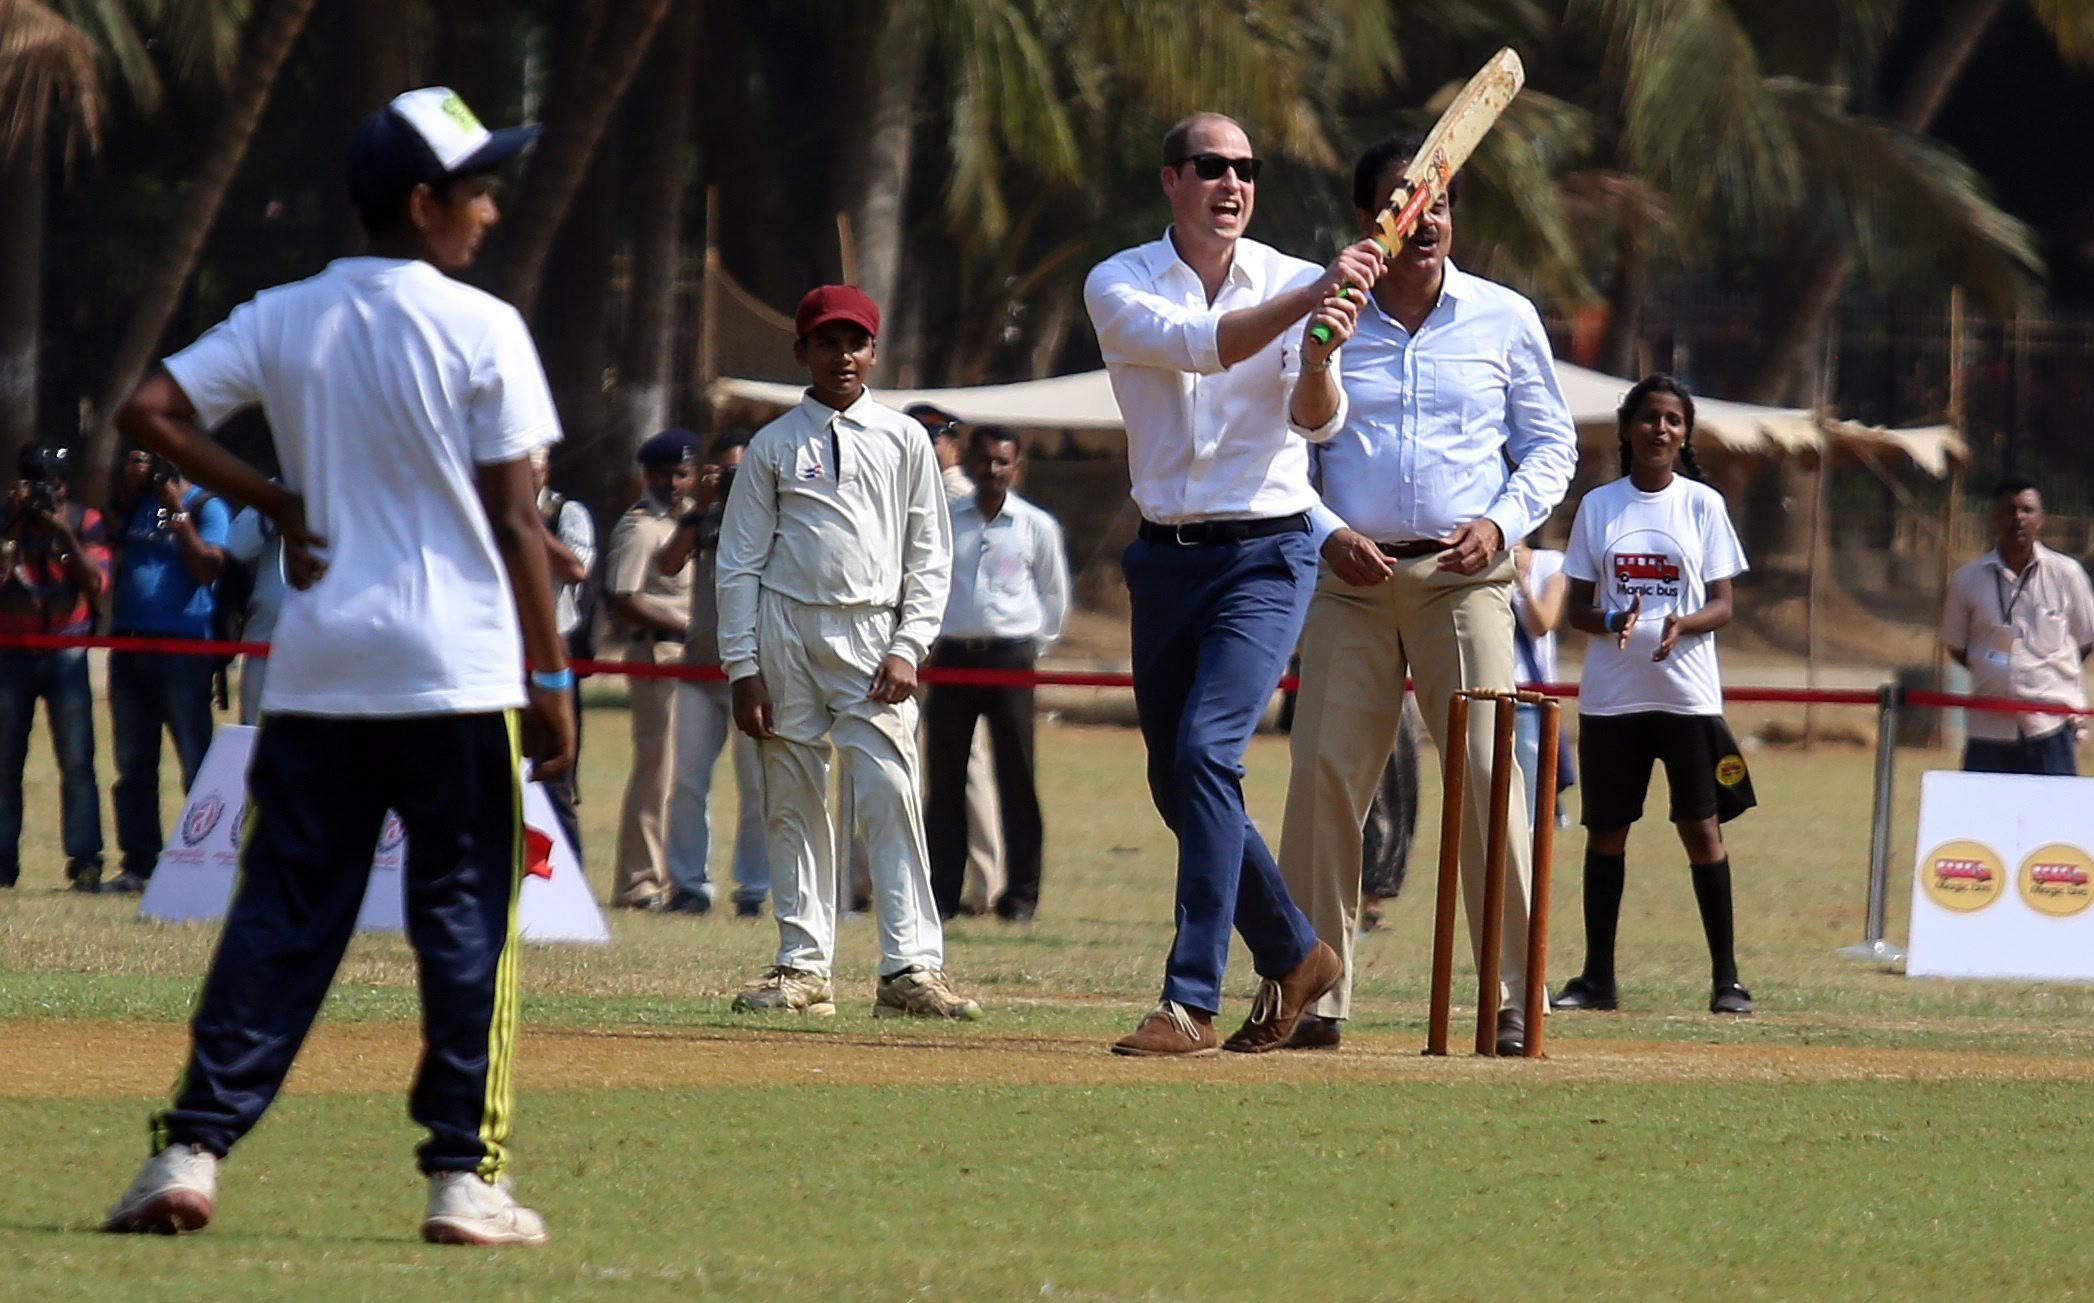 Prince William plays cricket along with children at Oval Maidan recreational ground in Mumbai, India on April 10, 2016.